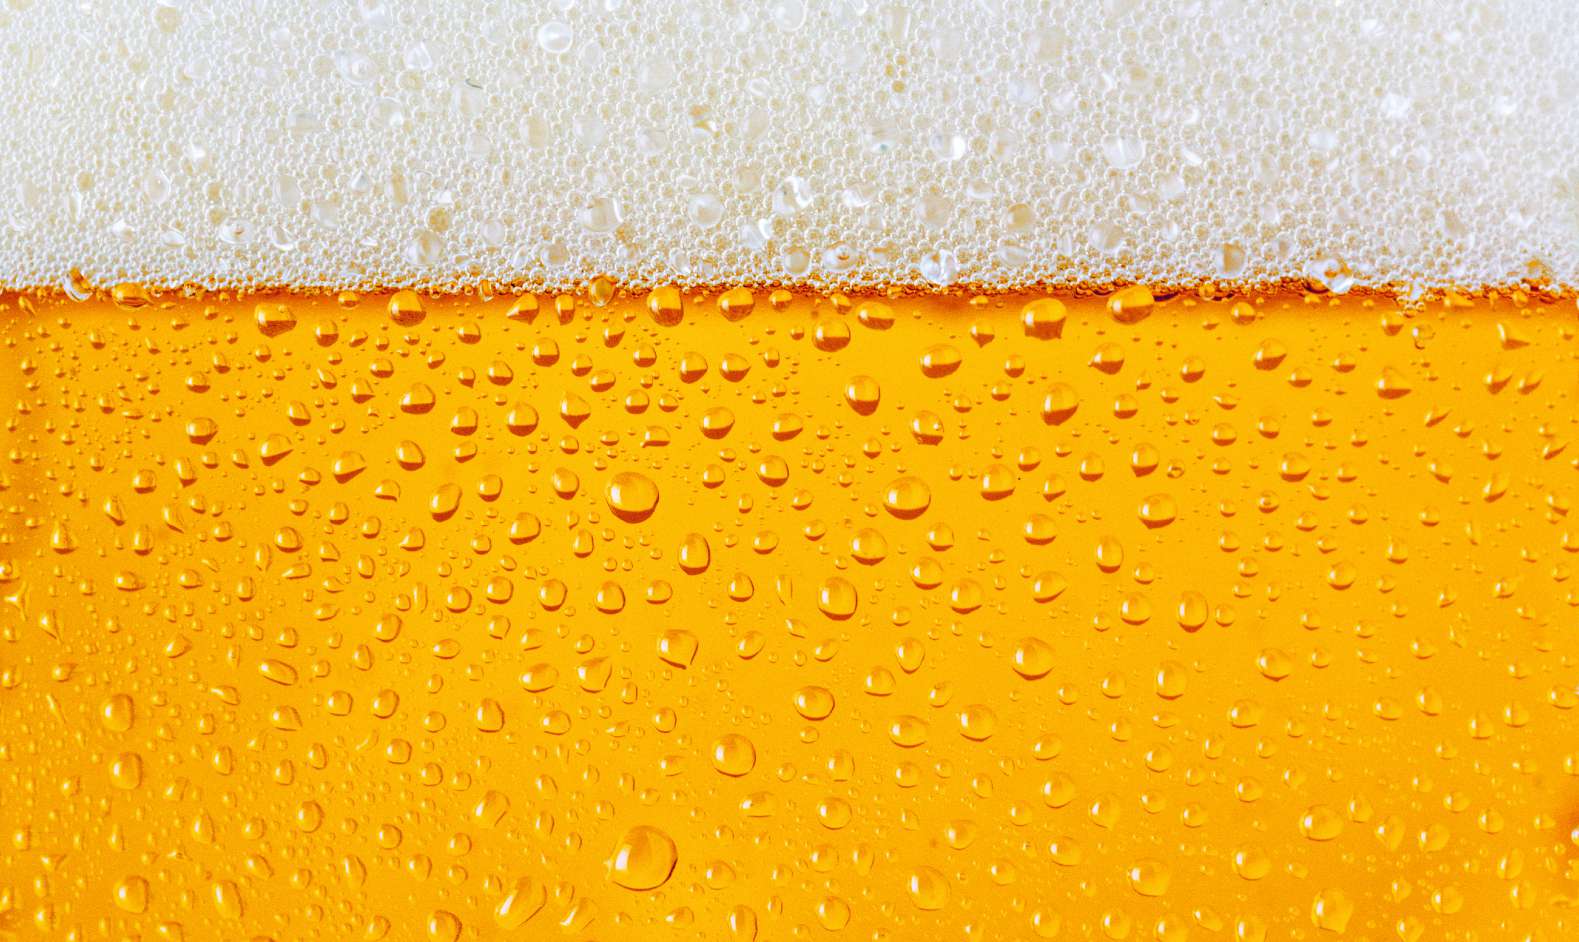 Dewy beer glass texture with froth 